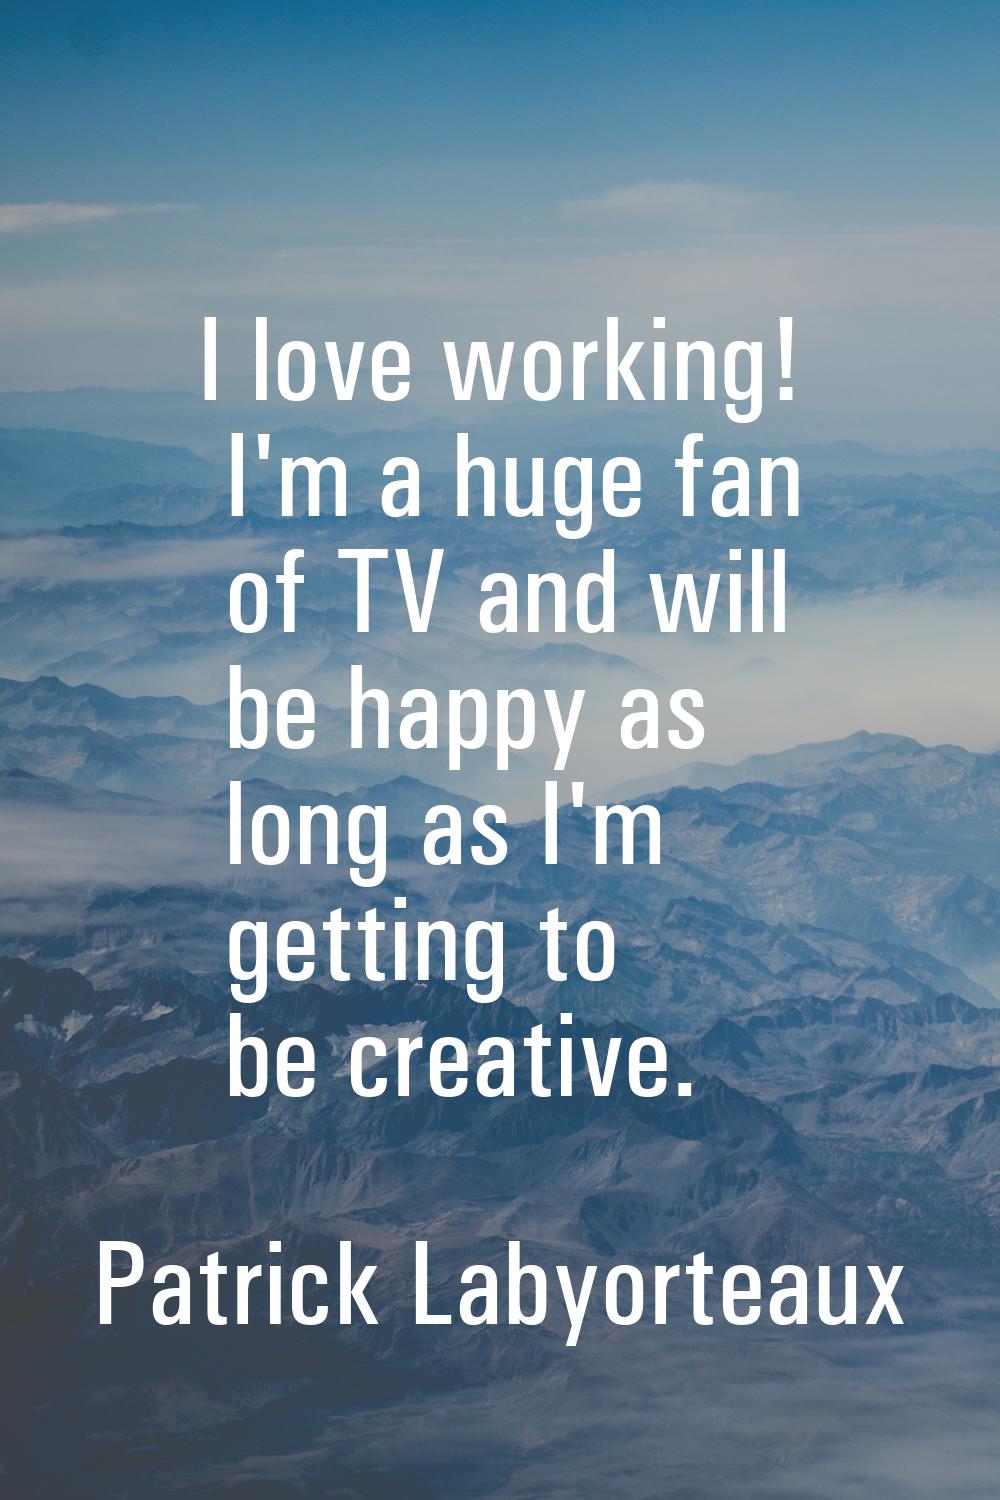 I love working! I'm a huge fan of TV and will be happy as long as I'm getting to be creative.